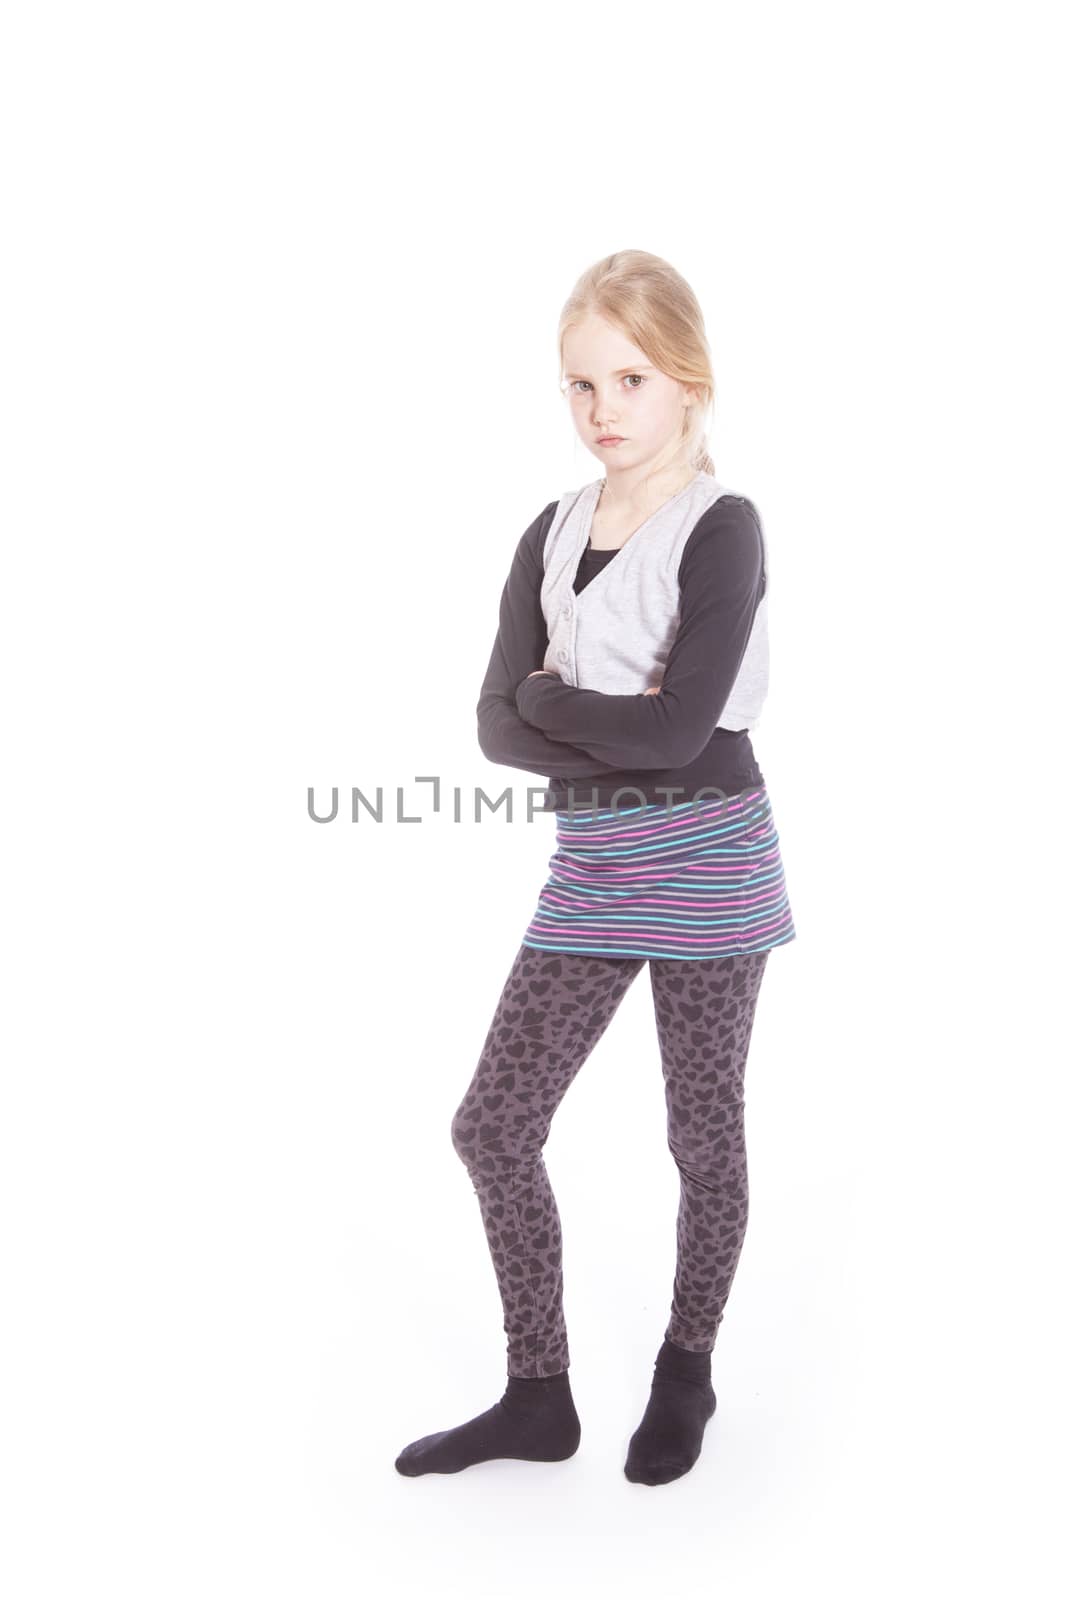 young blond girl with angry attitude in studio against white background